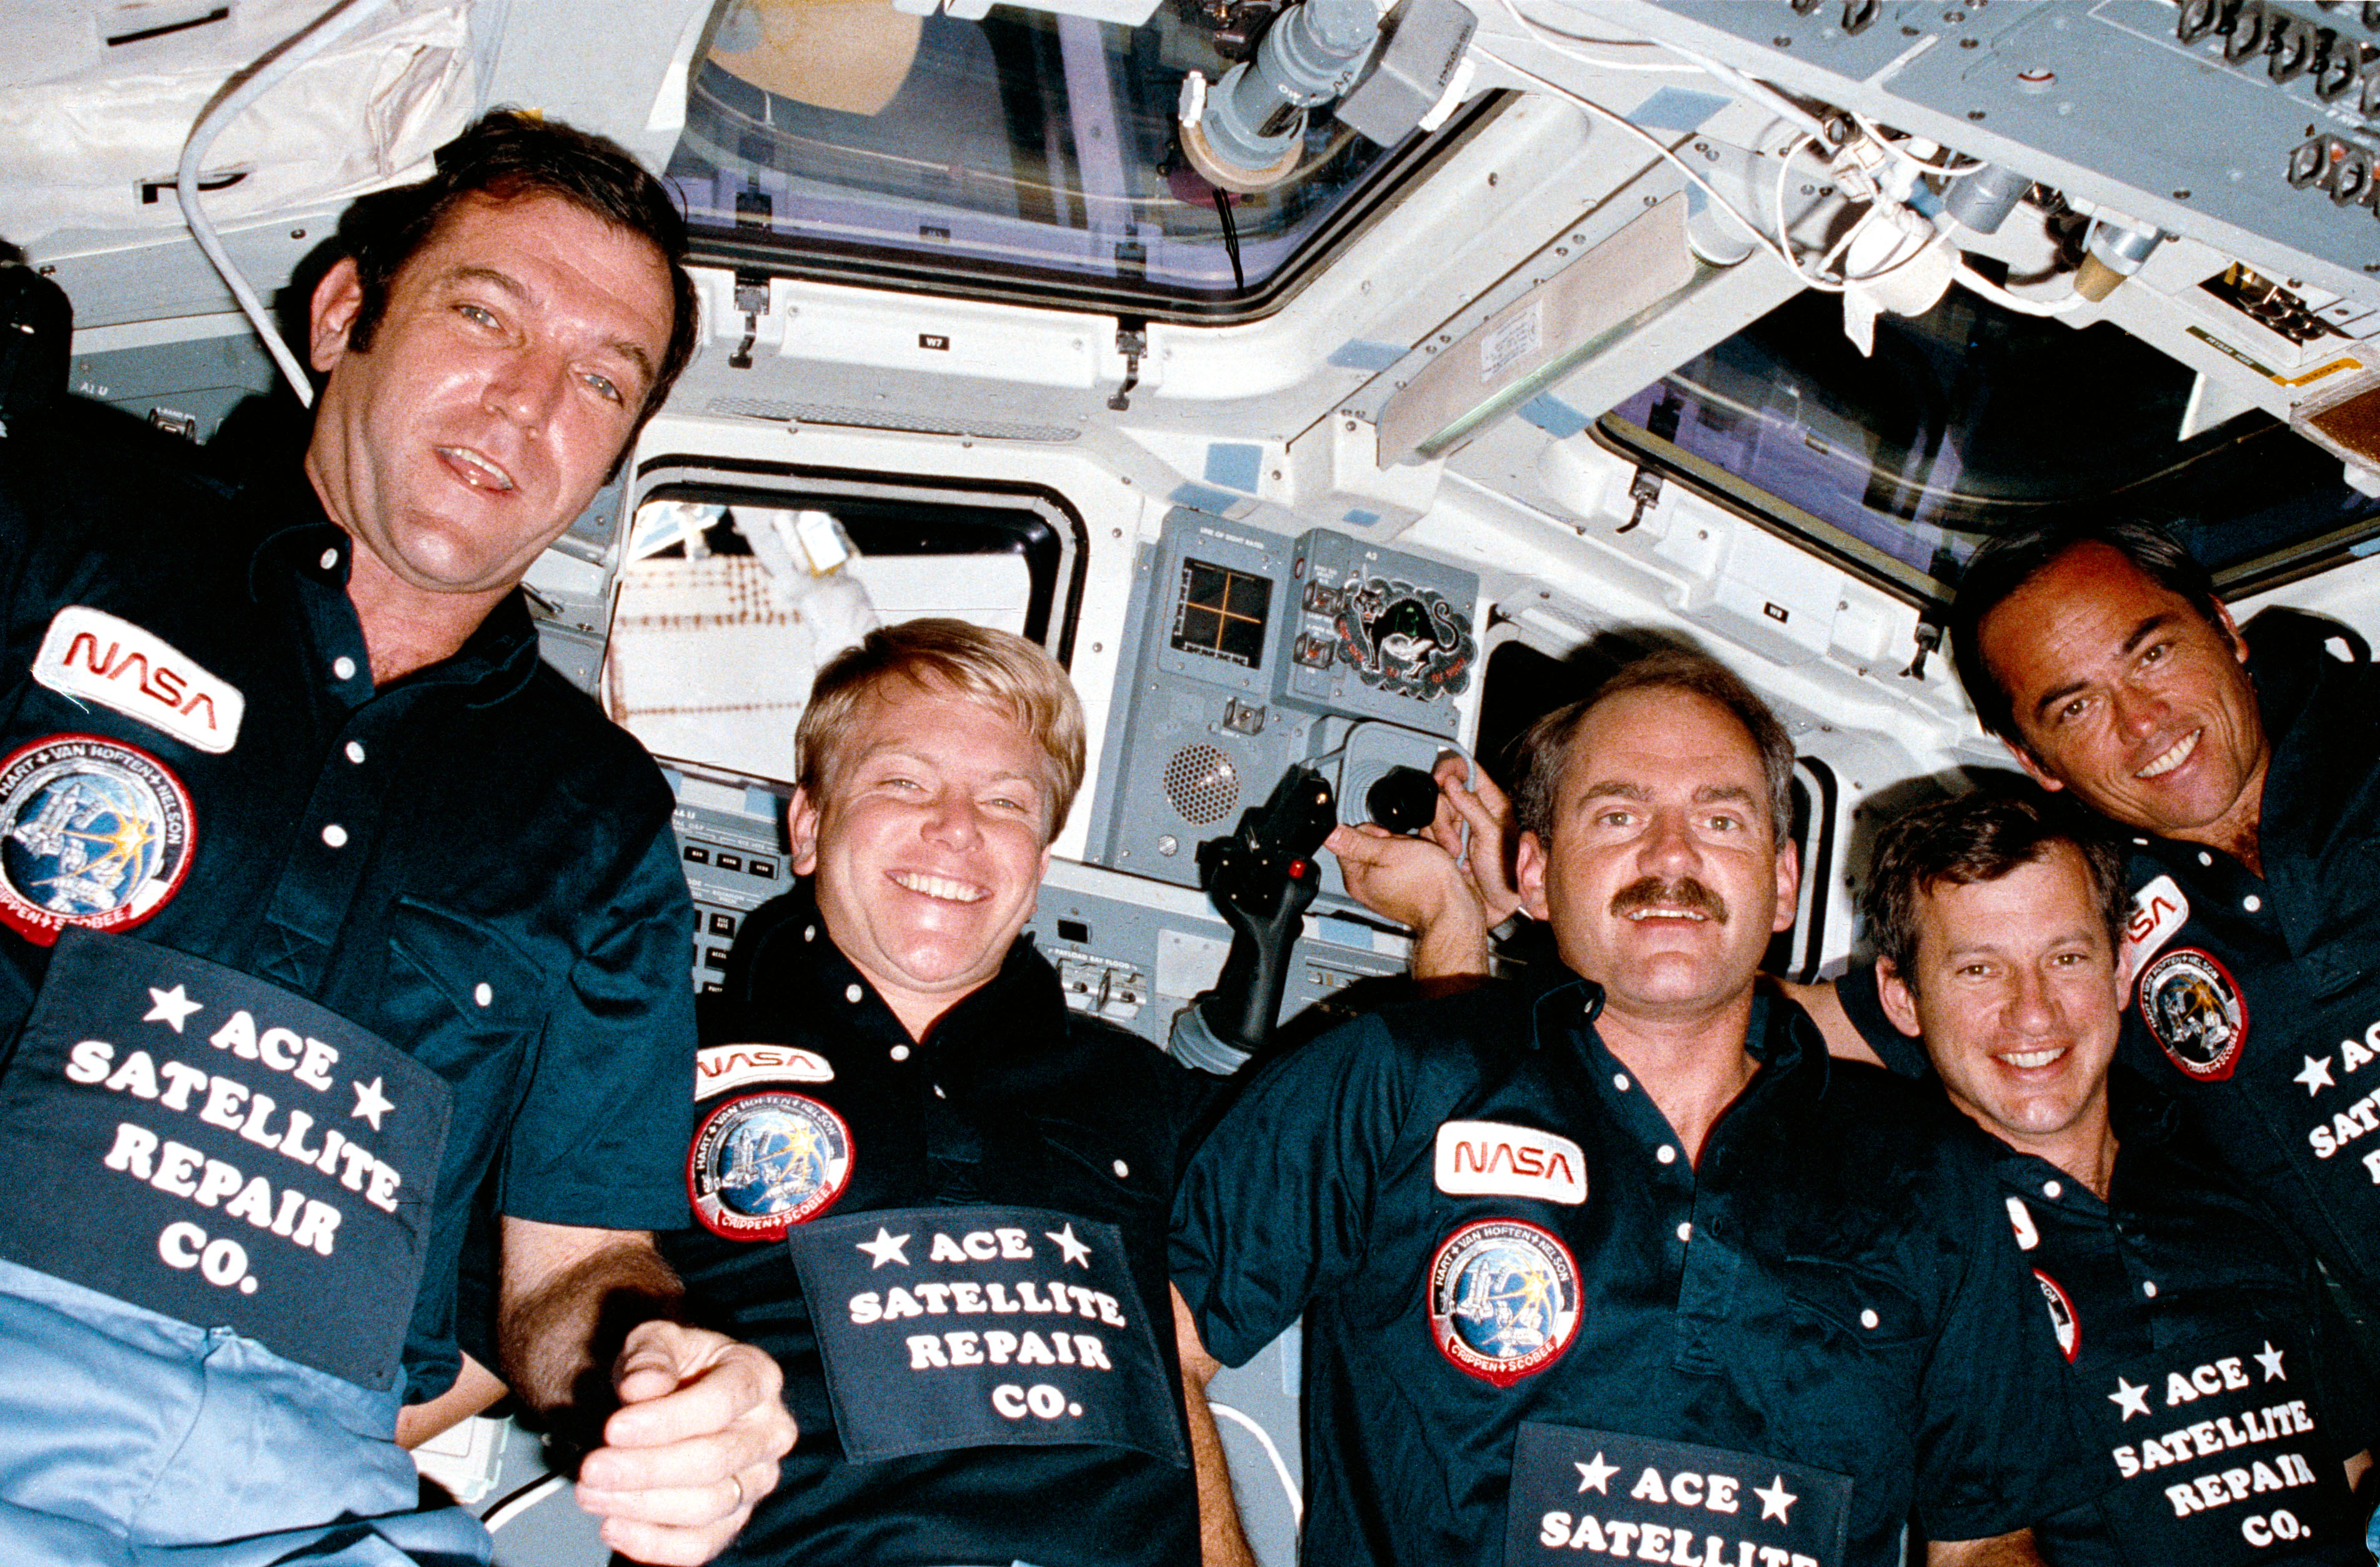 The STS-41C crew members pose on Challenger's flight deck near the end of their successful mission, wearing customized shirts